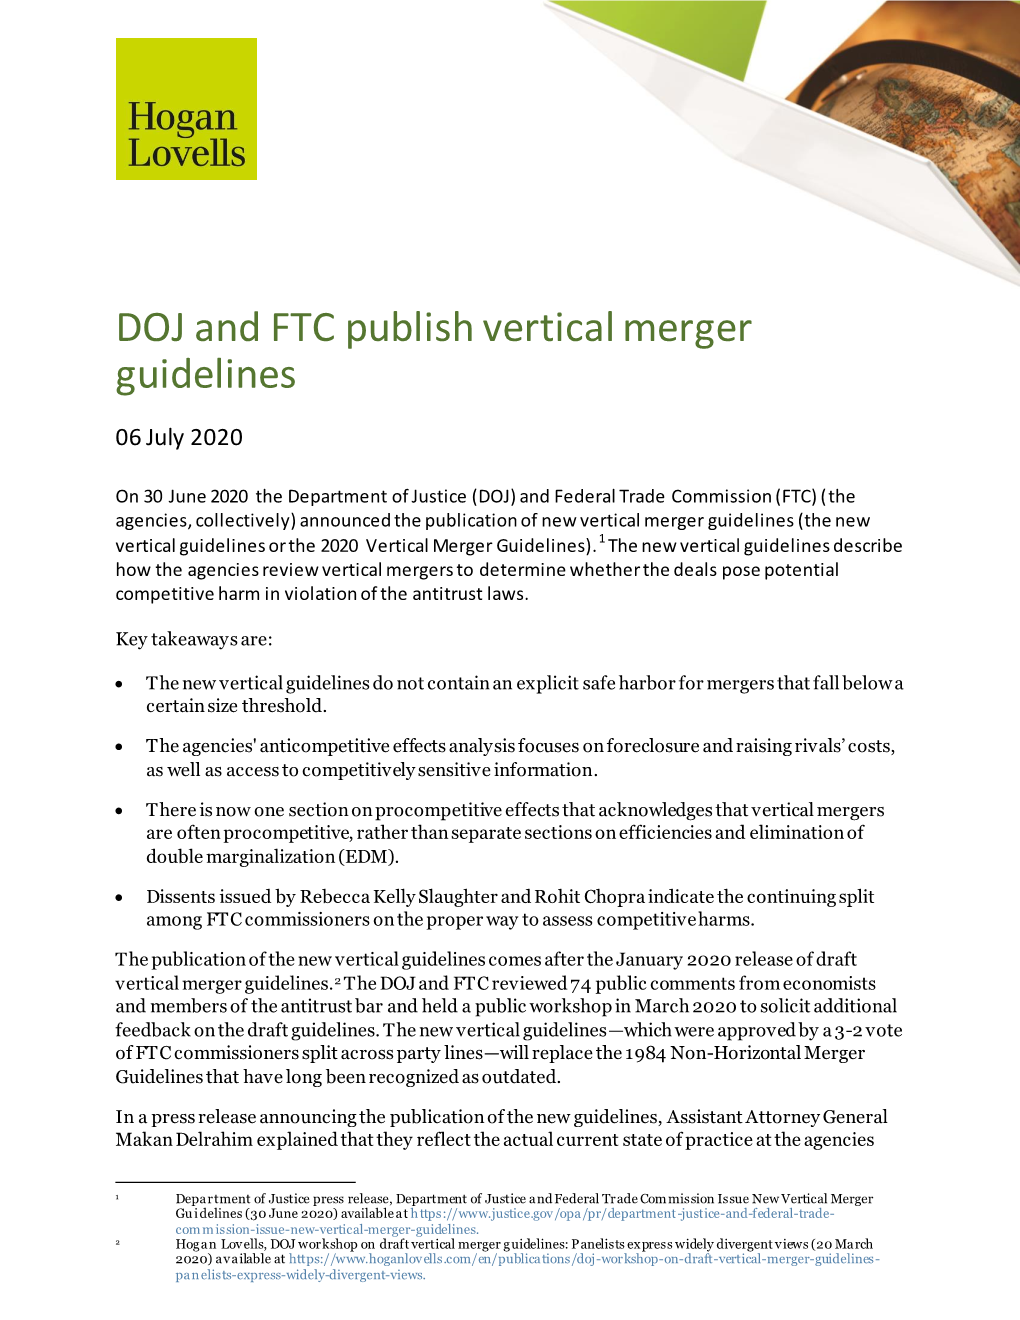 DOJ and FTC Publish Vertical Merger Guidelines